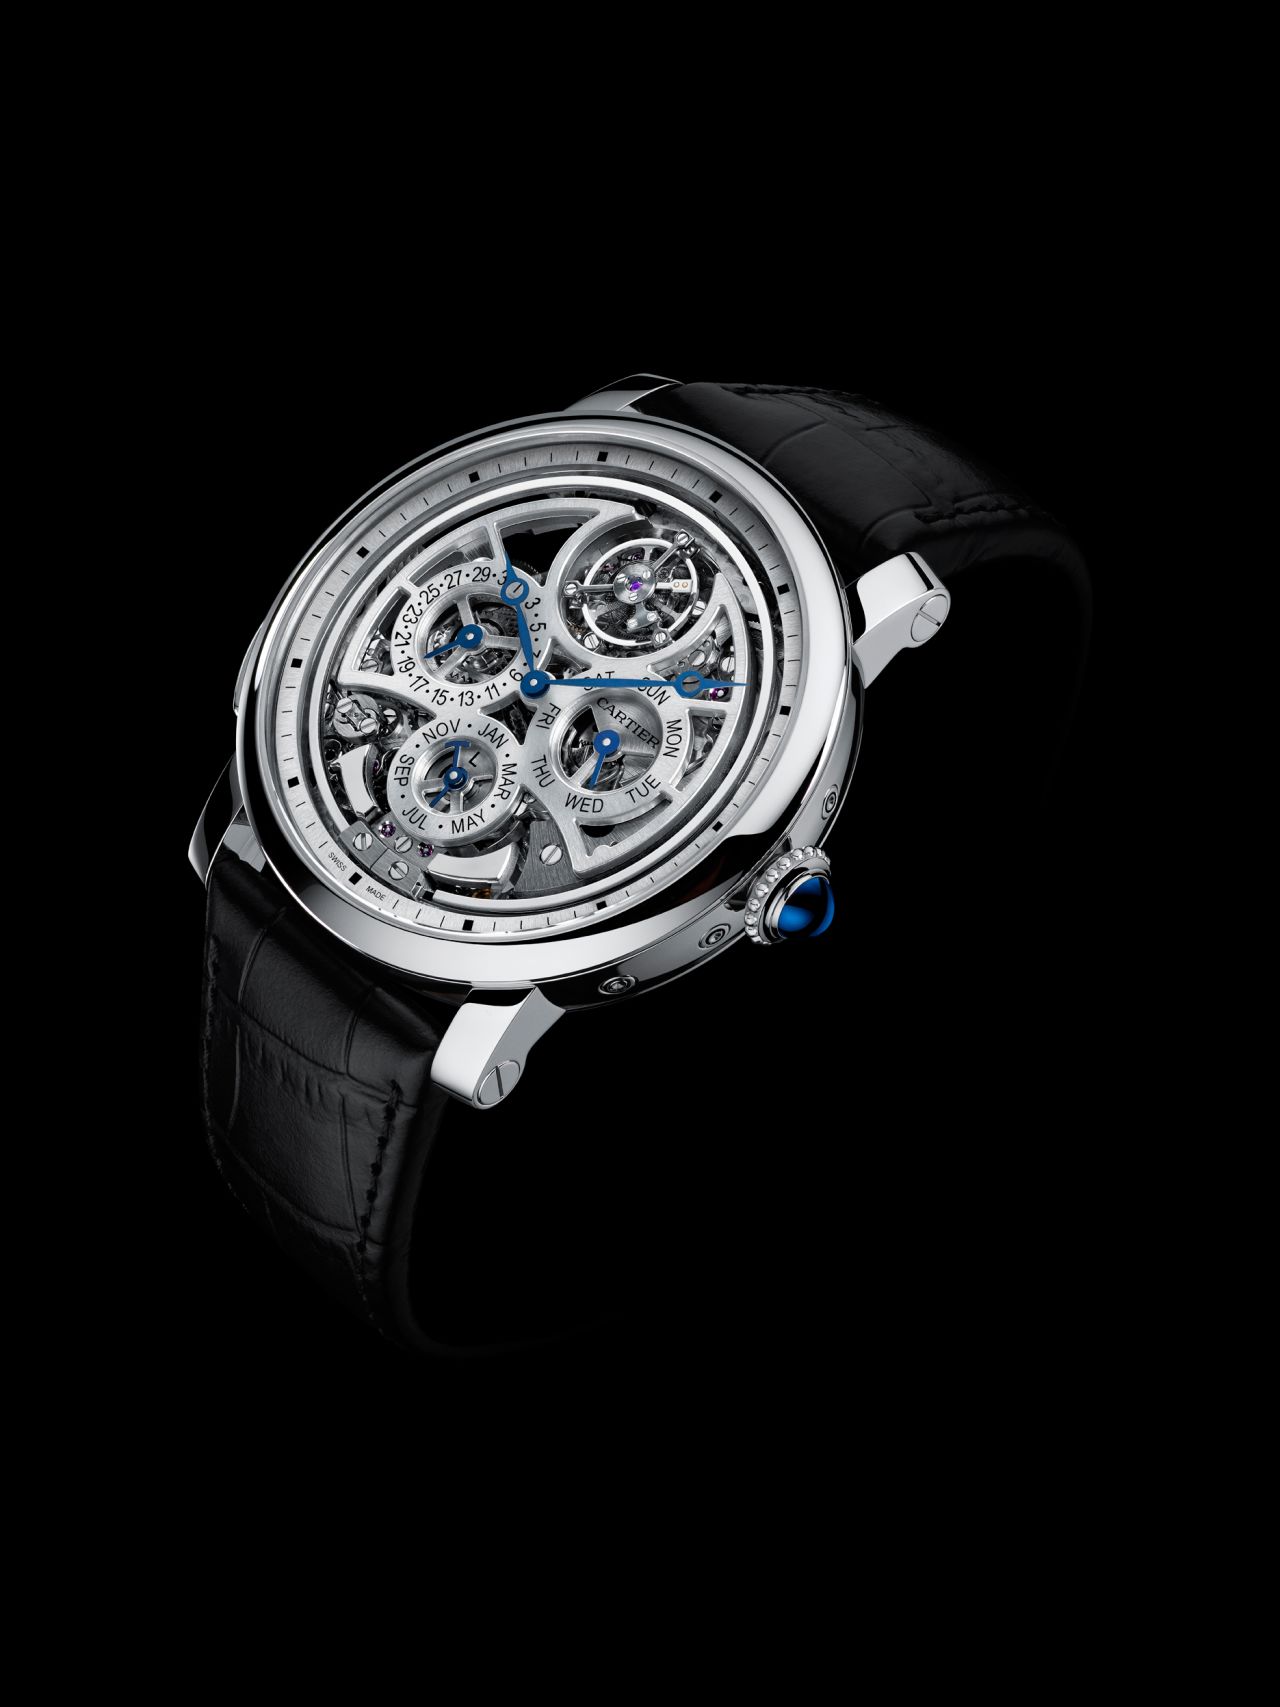 The Rotonde de Cartier Grande Complication watch, <a href="http://www.cartier.co.uk/" target="_blank" target="_blank">Cartier</a>'s most complex watch to date, is made up of 578 components and takes 15 weeks to create. It includes a perpetual calendar, a minute repeater and a flying tourbillon, and only needs to be adjusted once every 100 years. 